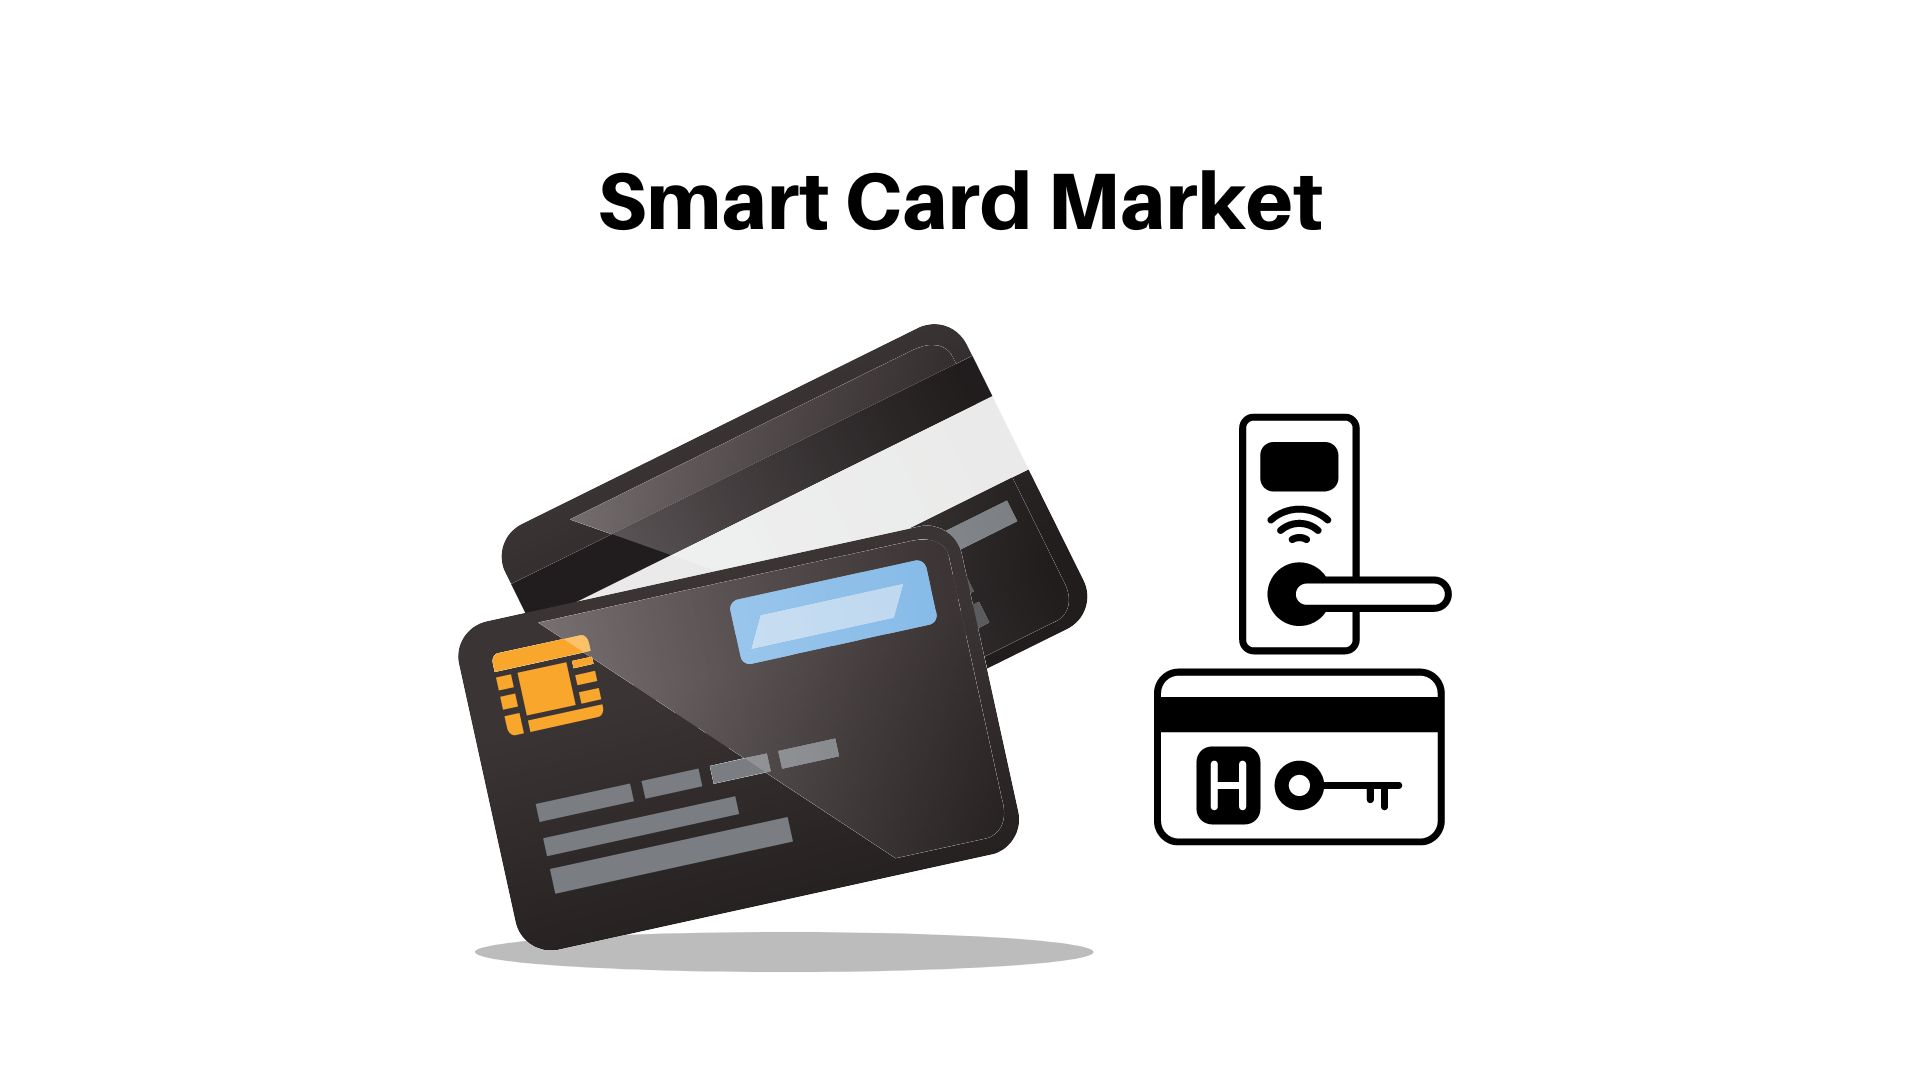 Smart Card Market is estimated to be worth USD 19.85 Billion by 2033 | CAGR of 5.7%